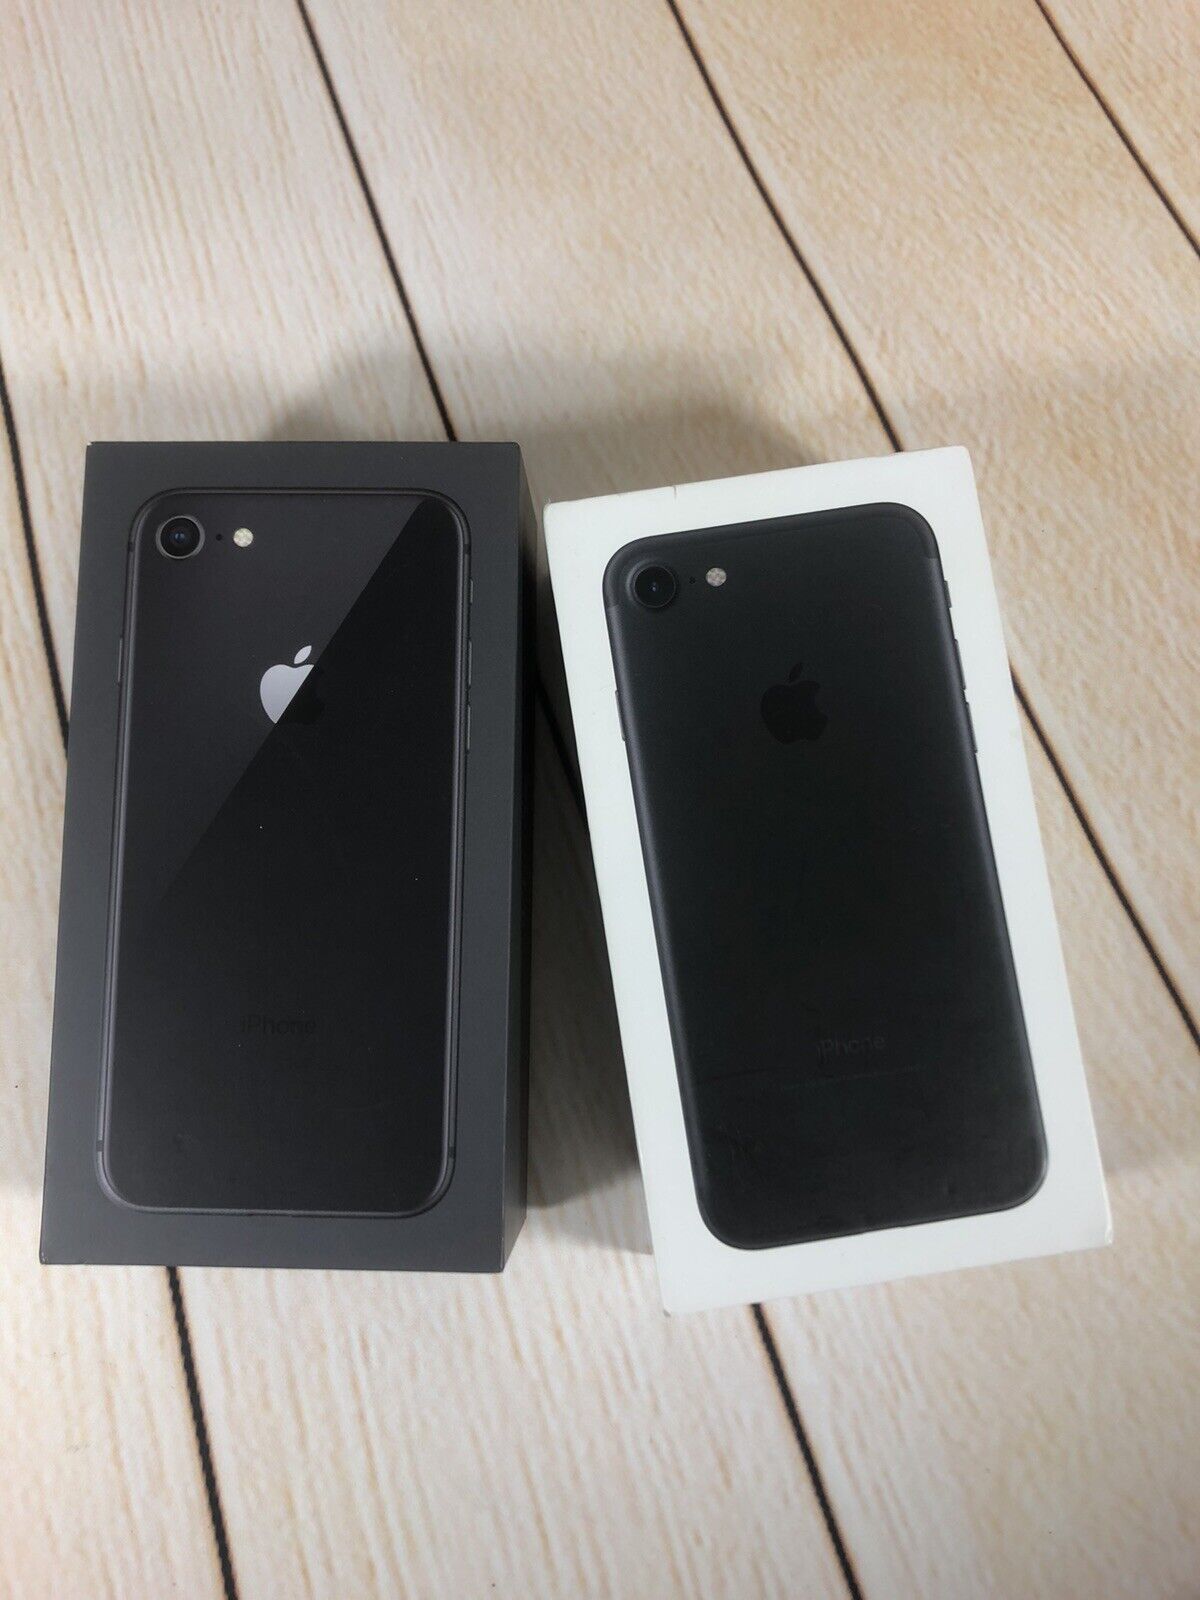 iPhone 8, Space Gray, 64GB & iPhone 7, Black, 32GB Boxes Only 2 Item Lot  Apple Do Not Apply